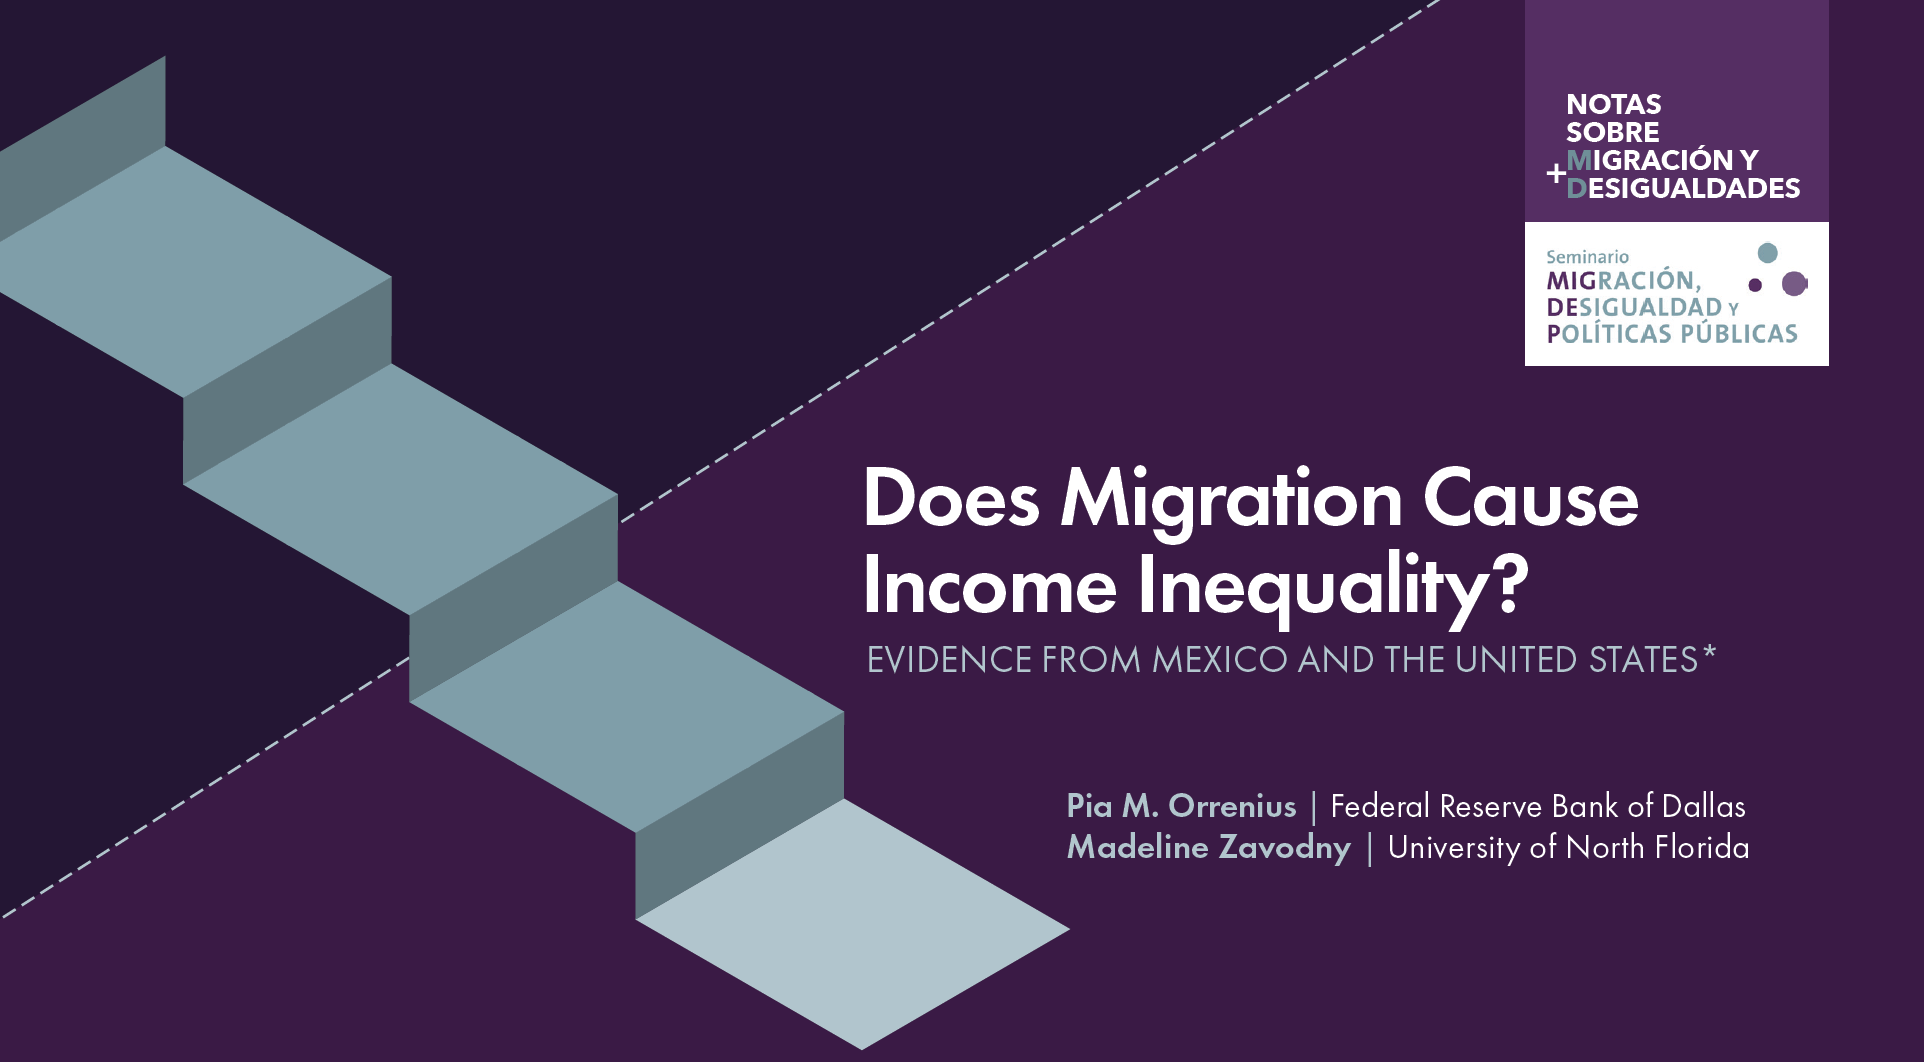 Does Migration Cause Income Inequality? Evidence front Mexico and the United States